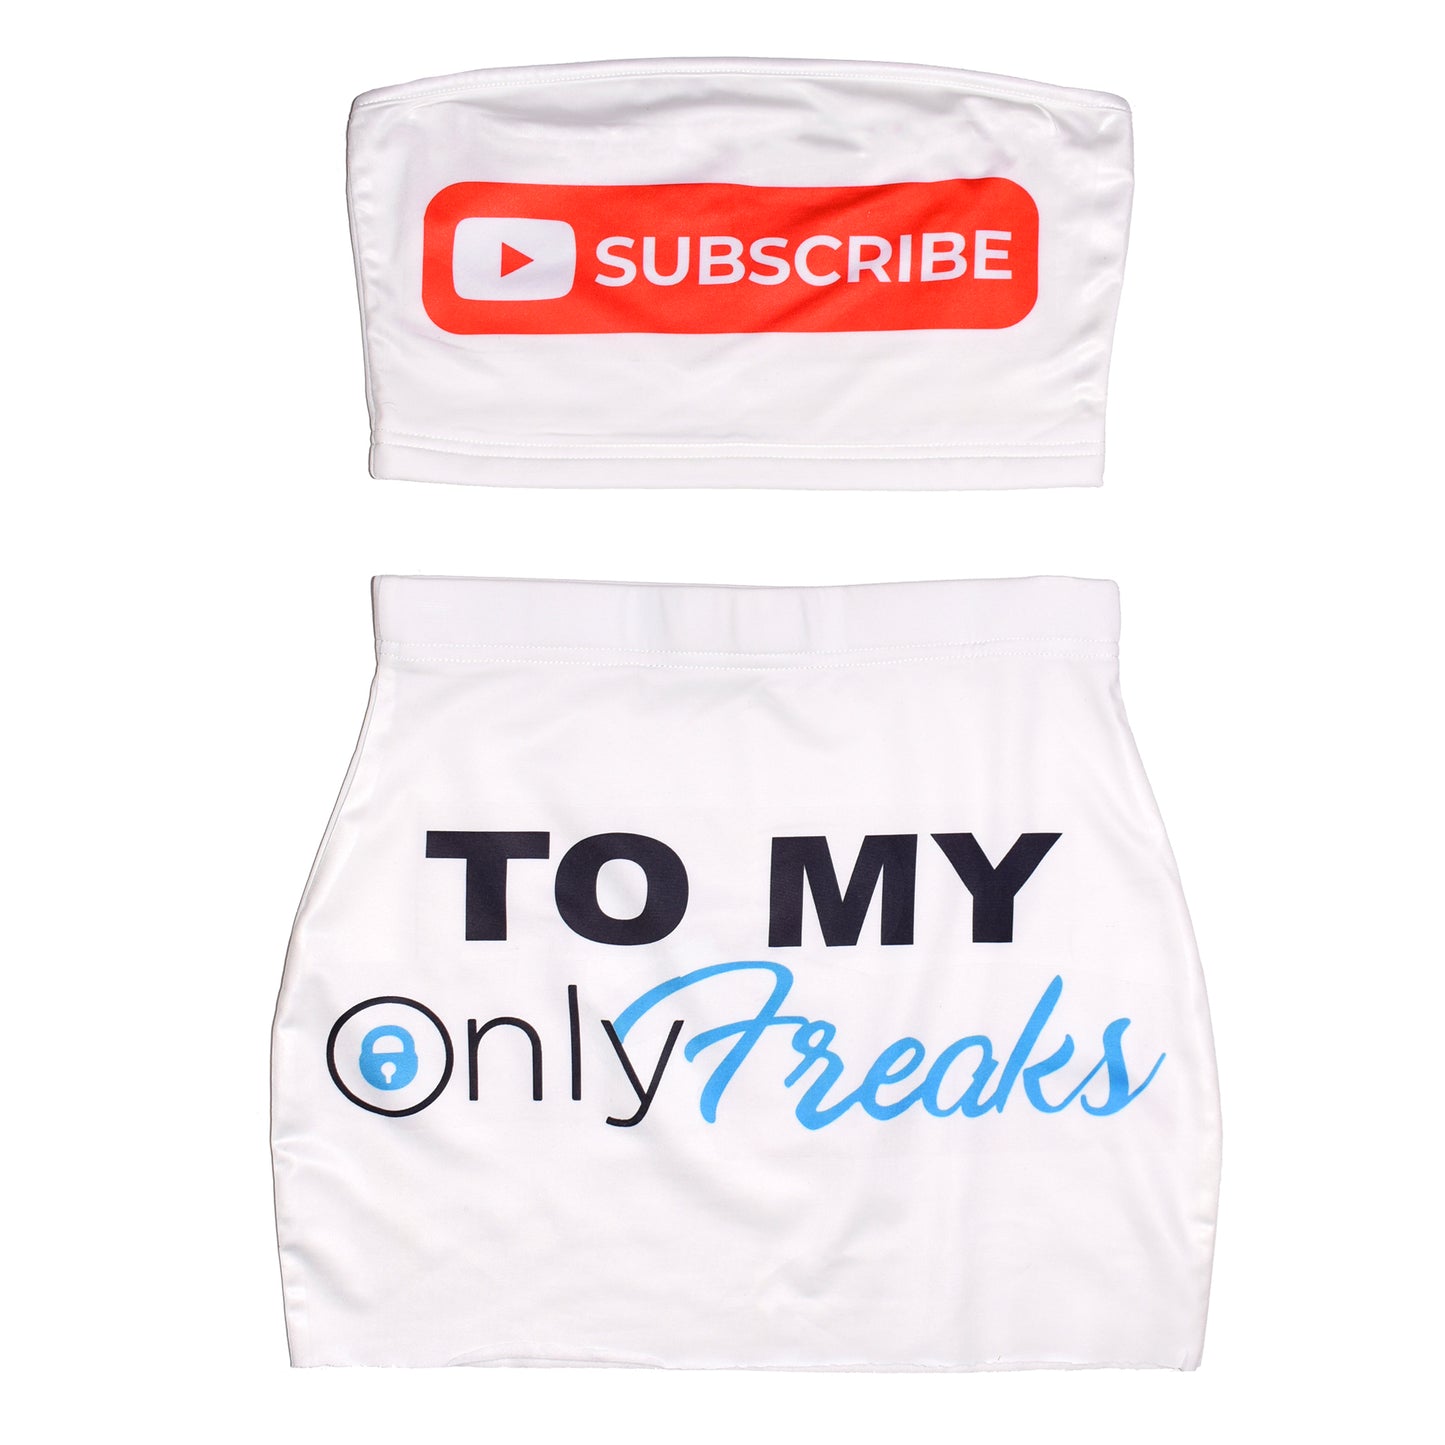 SUBSCRIBE TO MY ONLY FREAKS Tube Top + Skirt+ Like Heart Purse